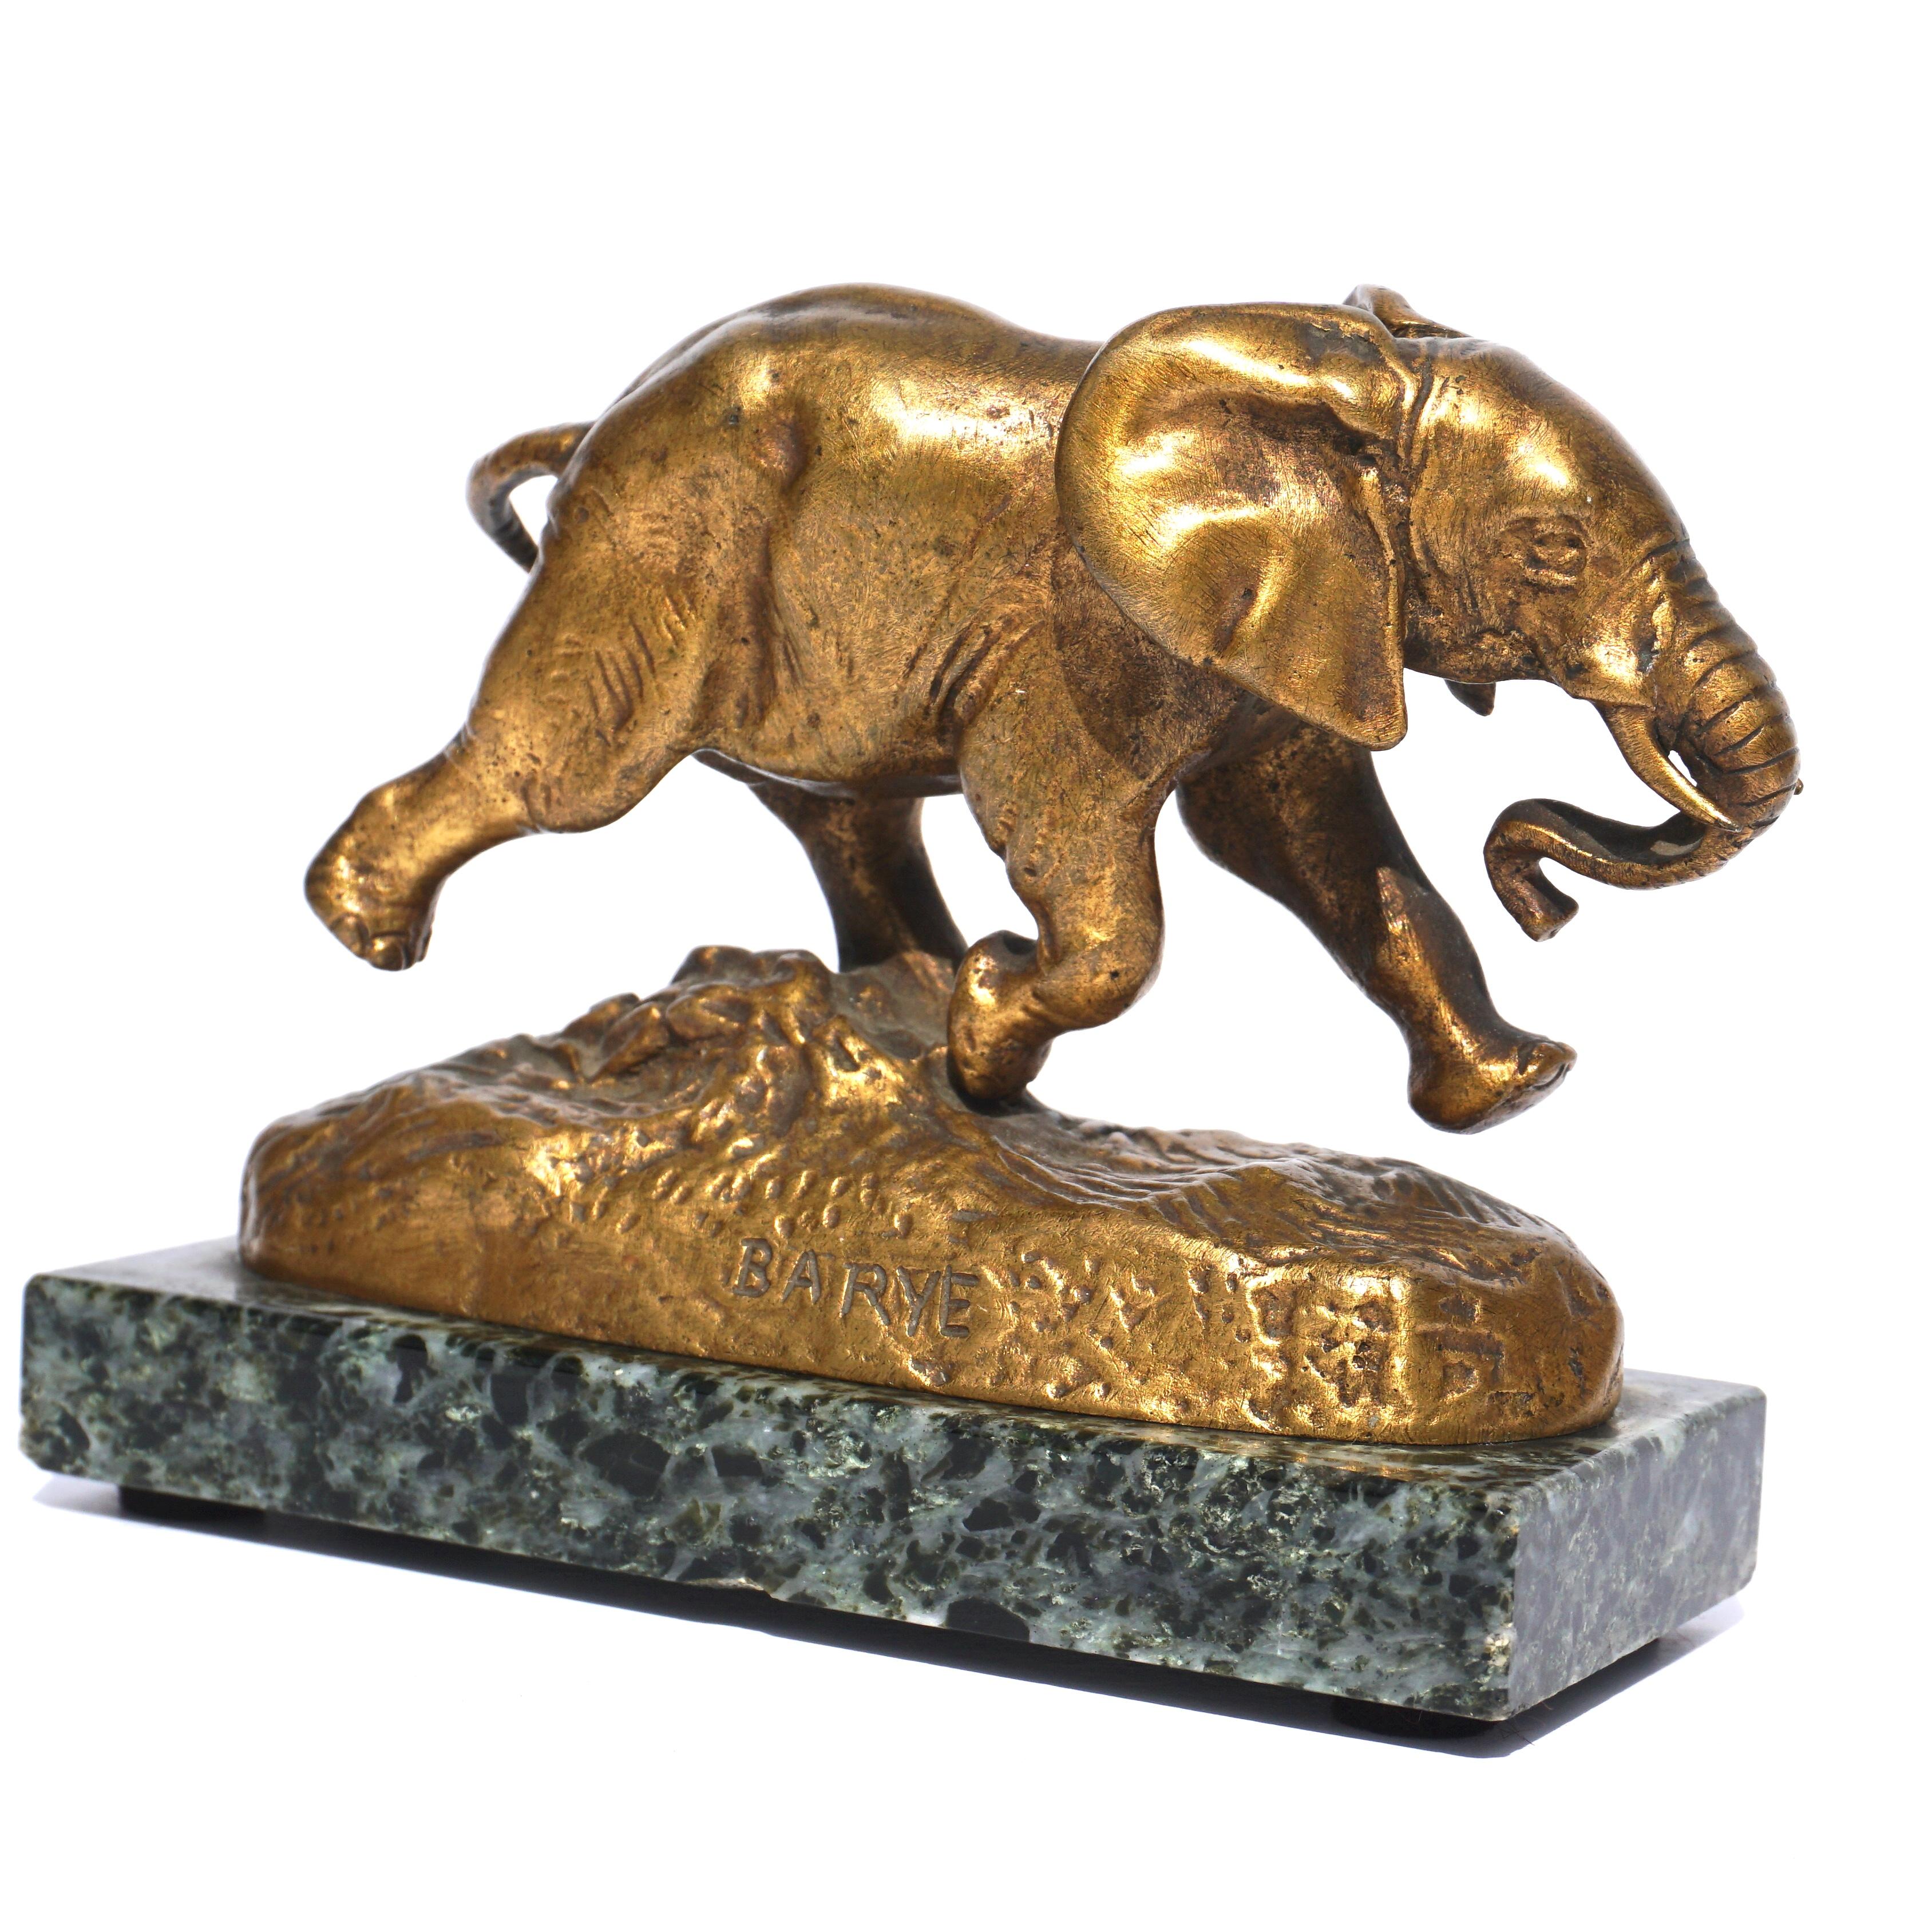 Antoine-Louis Barye (French, 1795-1875)
Éléphant du Sénégal (Senegalese Elephant) charging elephant.
signed 'BARYE', stamped 'F. BARBEDIENNE. PARIS'
Gilt gold patina on a green marble plinth.
Measures: Height 2.75 inches (7 cm)
Width 4 inches